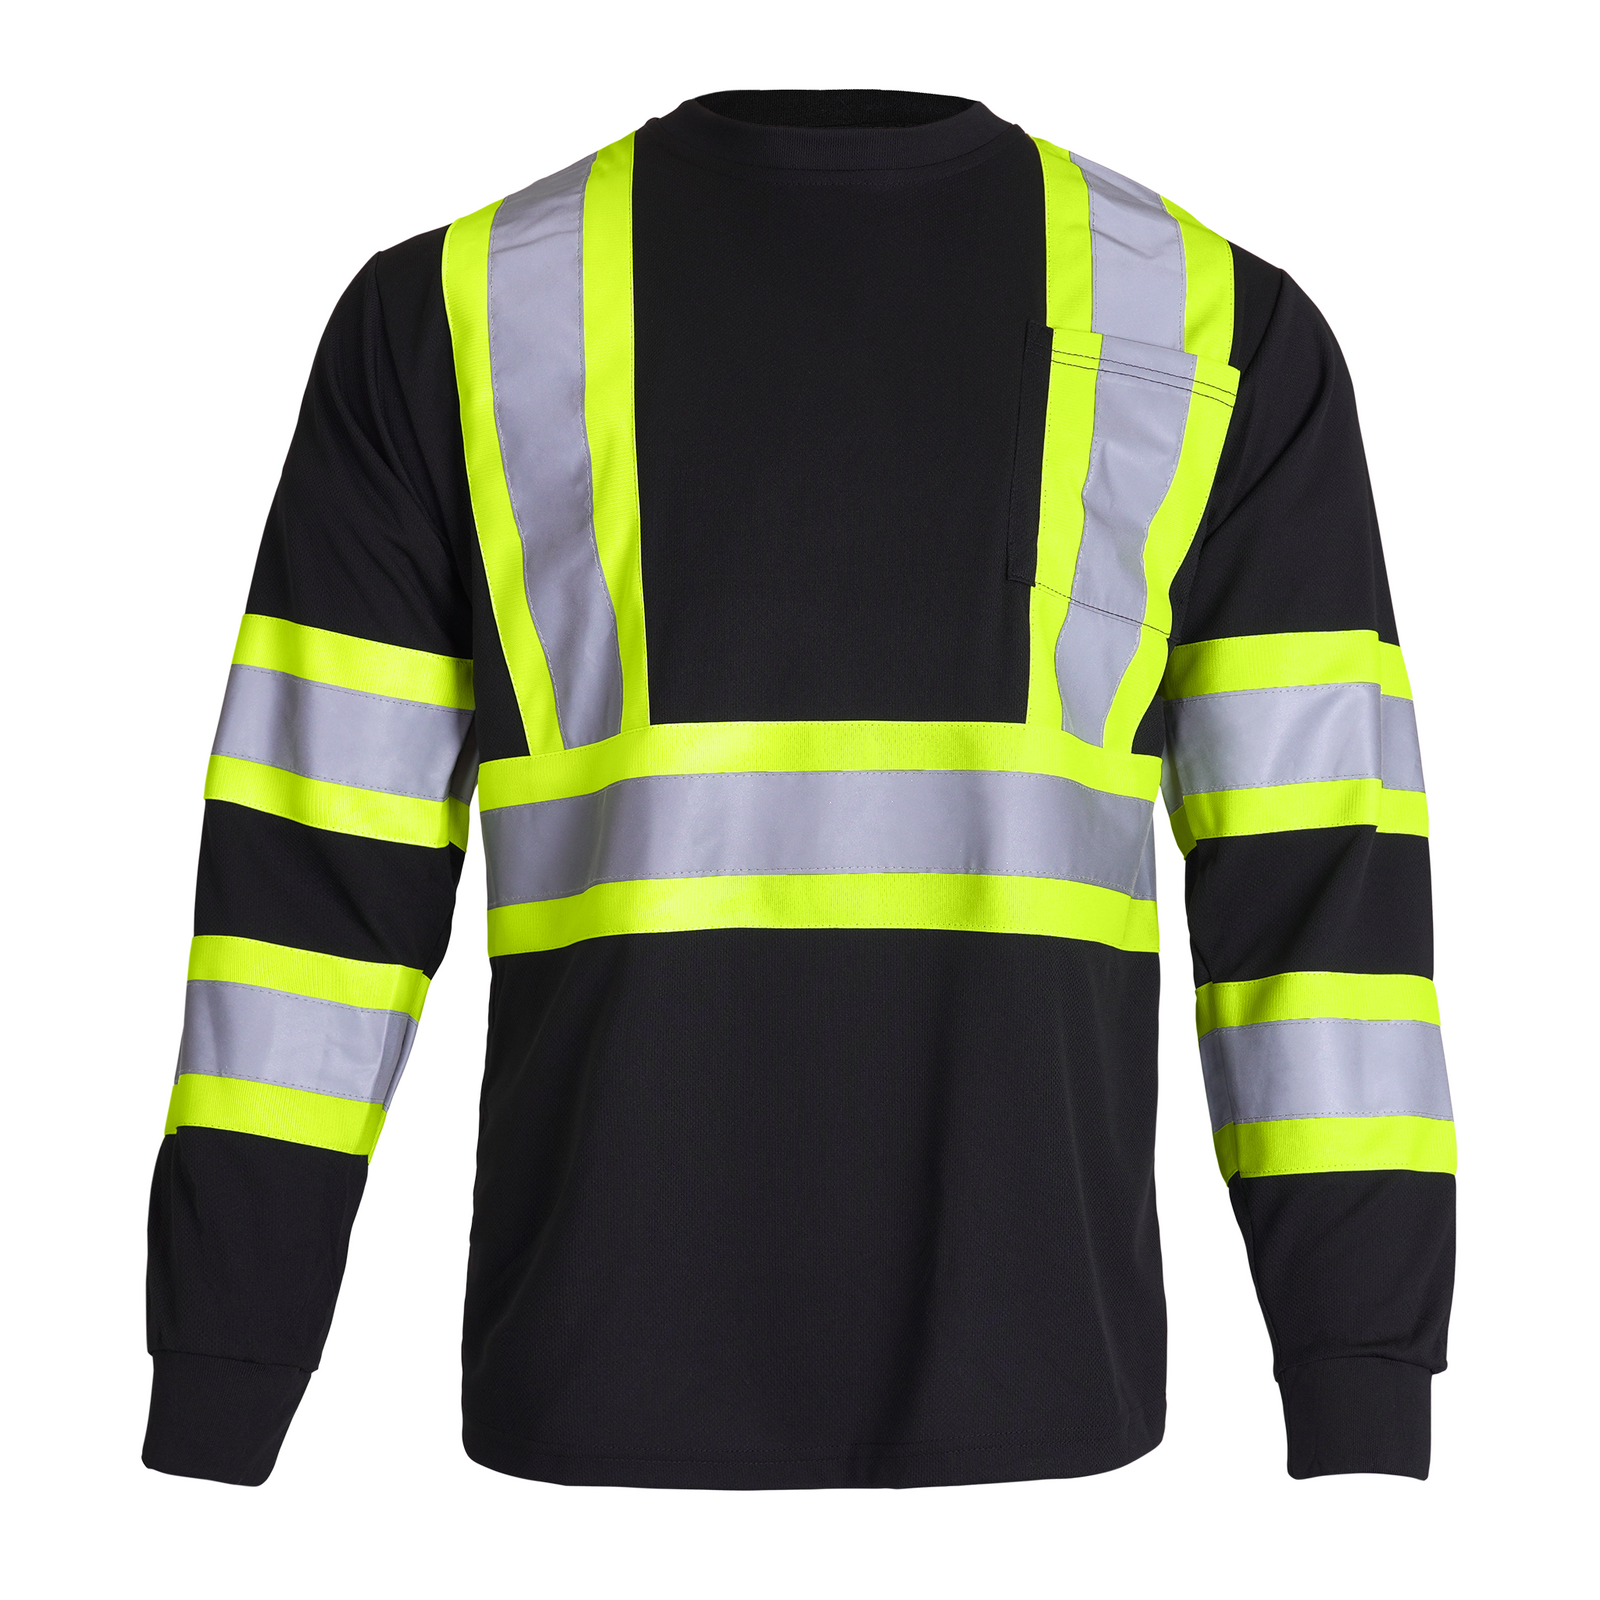 Back of the JORESTECH Hi-vis reflective two tone long sleeve safety black and yellow ANSI compliant  shirt